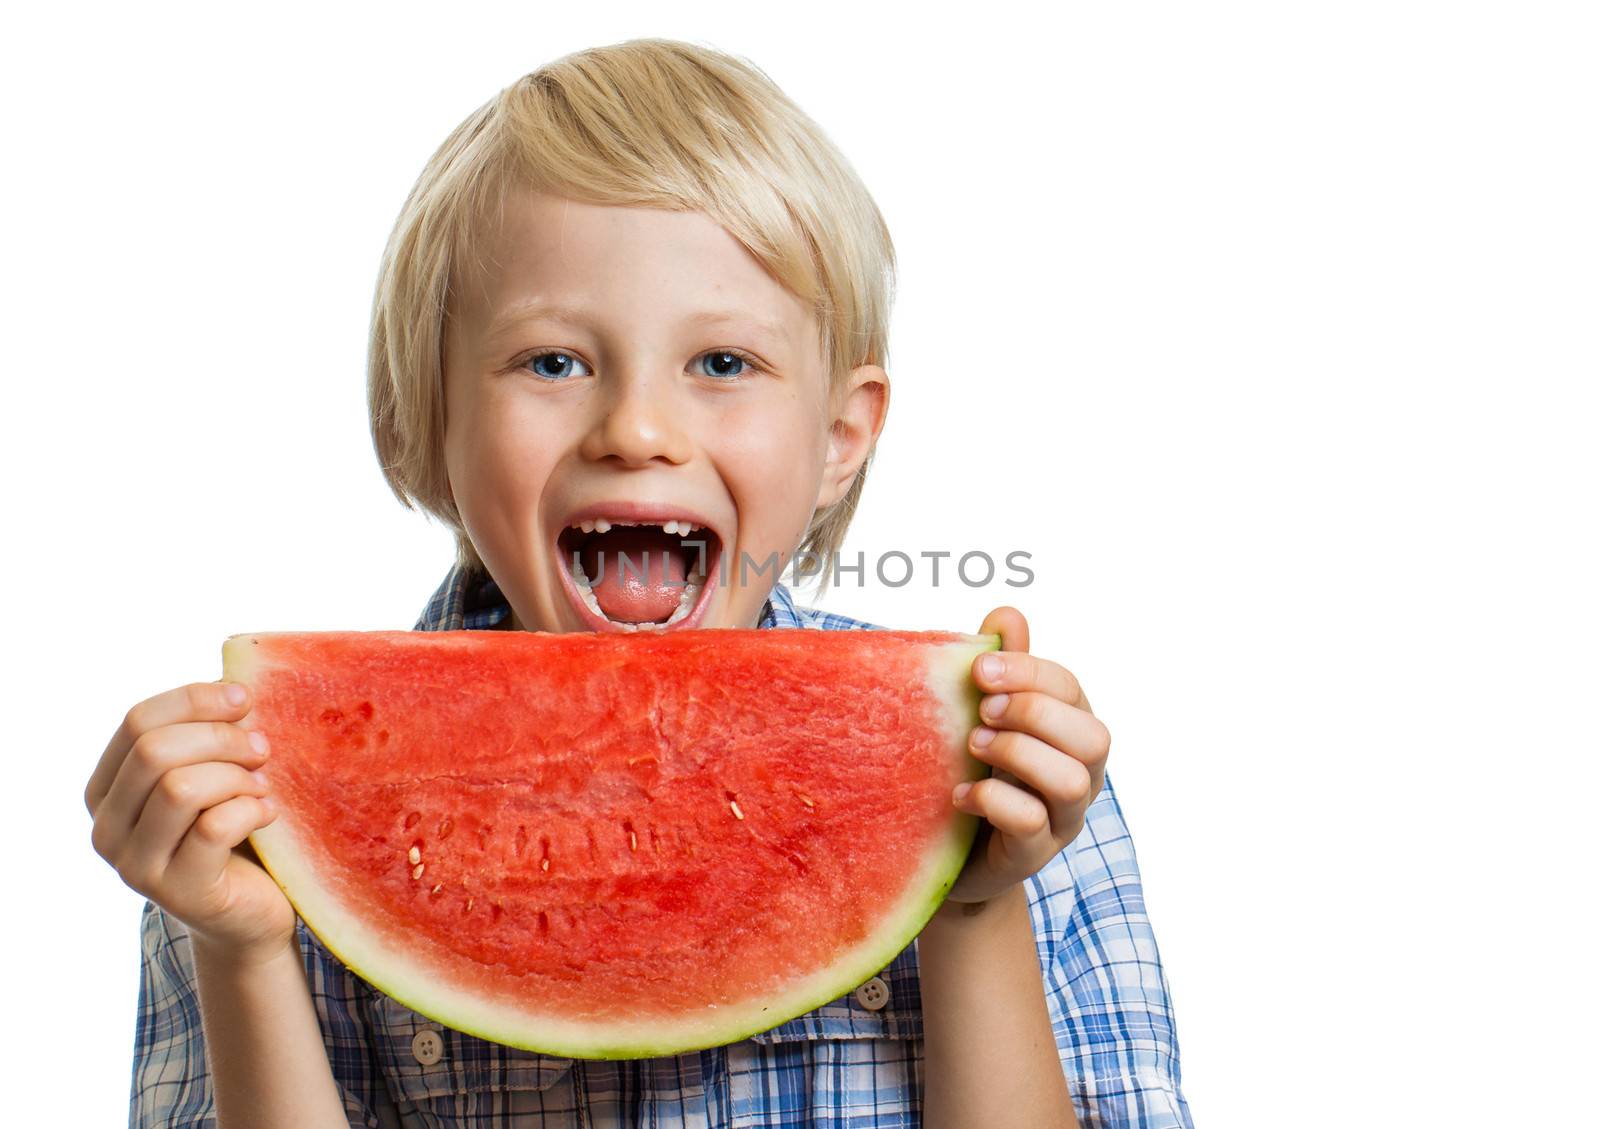 A smiling happy boy about to take a bite of  juicy slice of watermelon. Isolated on white.